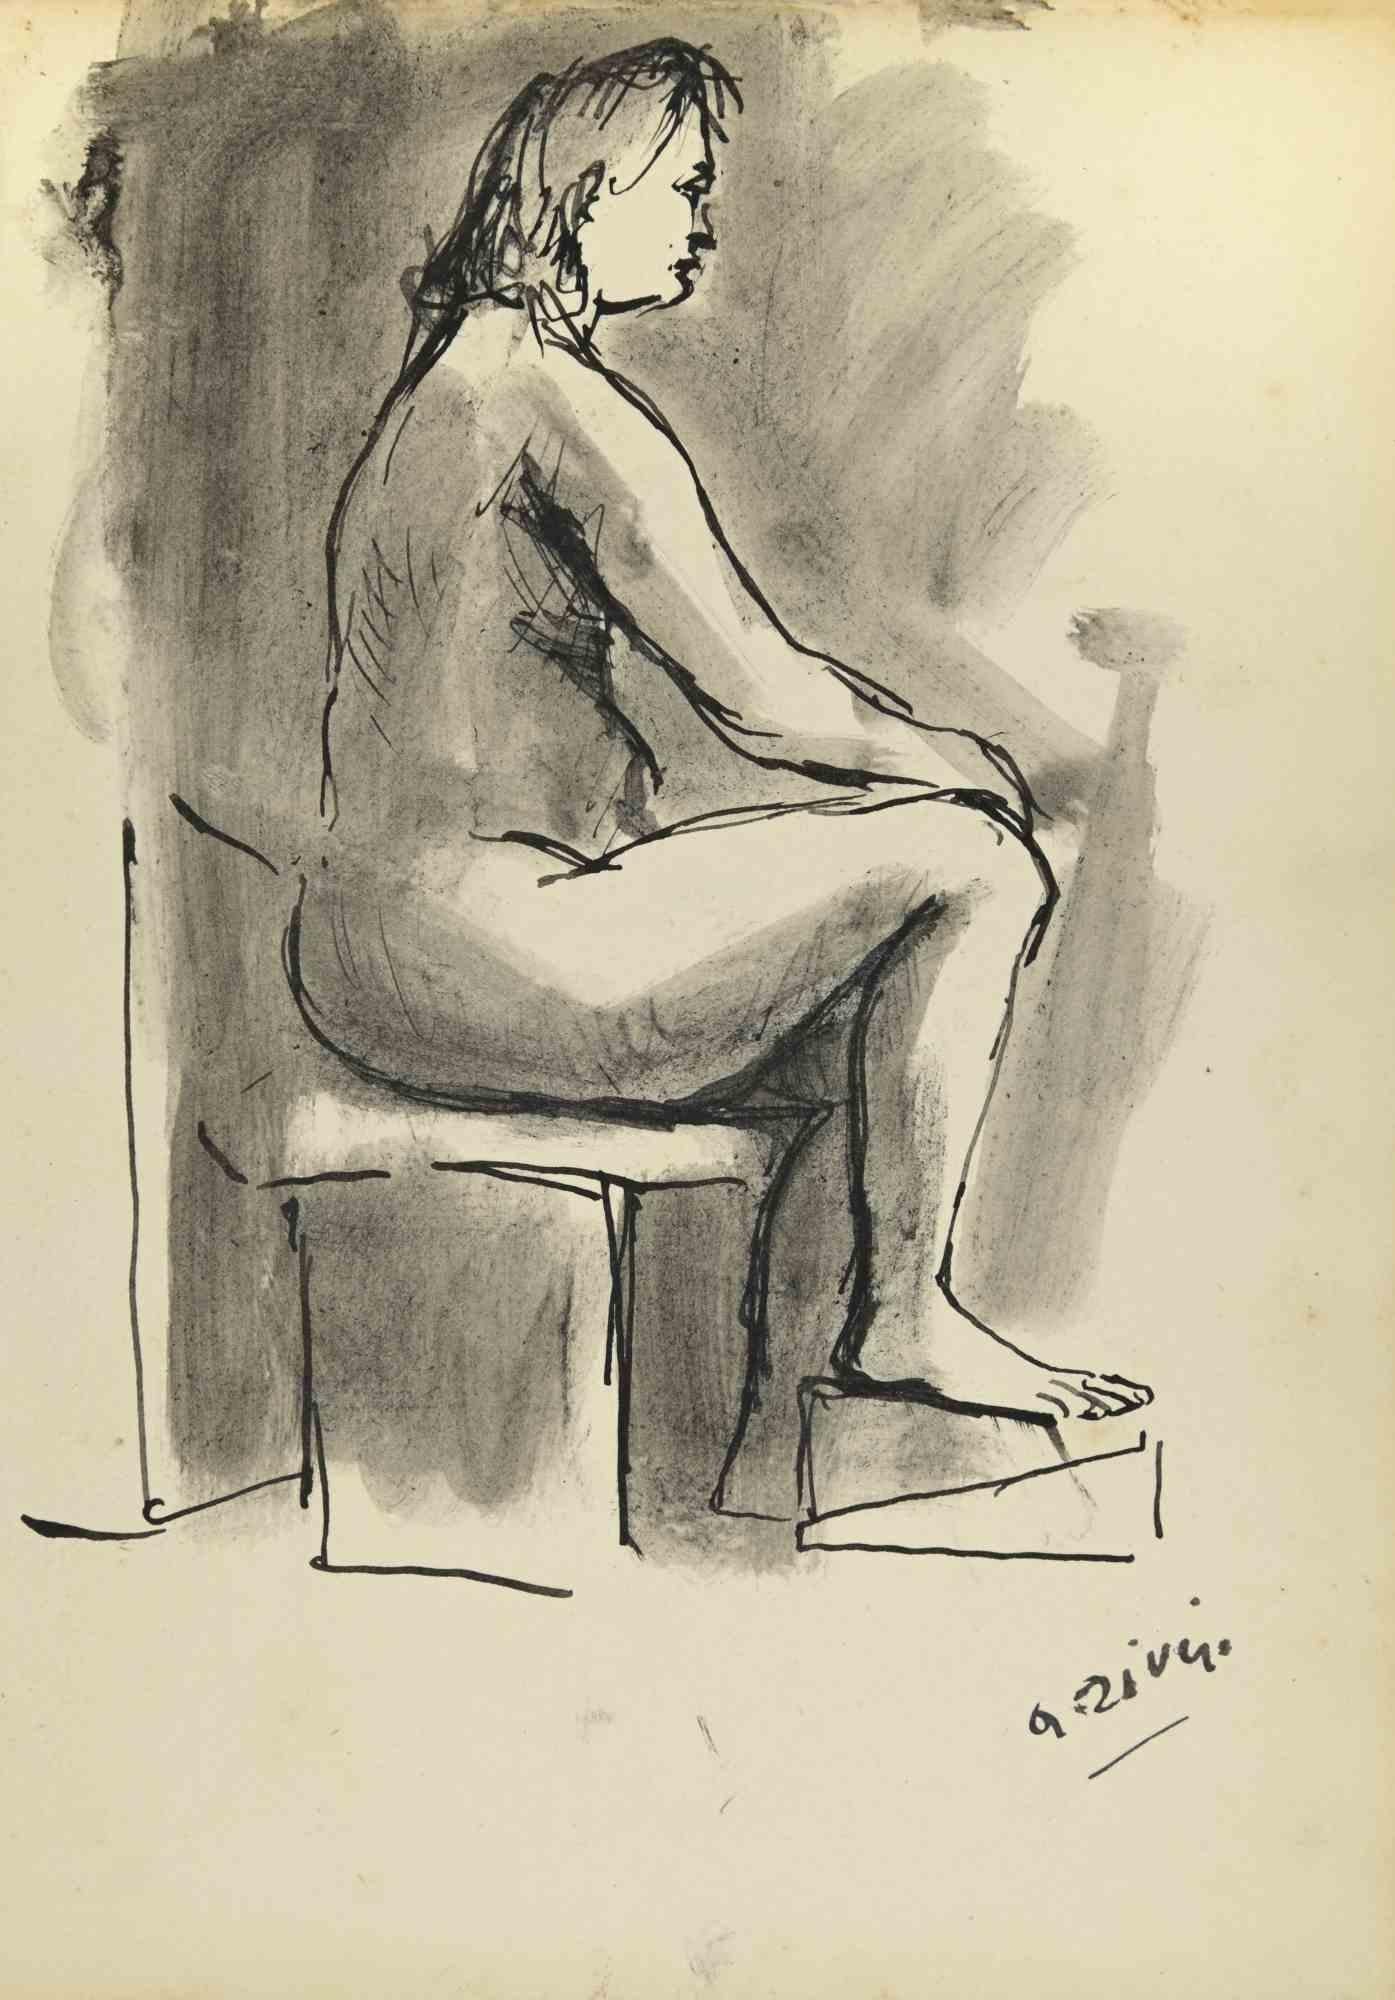 Nude is a drawing realized by Alberto Ziveri in the 1930s.

Watercolor and ink on paper.

Hand-signed and dated.

In good conditions with slight foxing.

The artwork is represented through deft strokes masterly.

Alberto Ziveri (Rome,1908 – 1990),